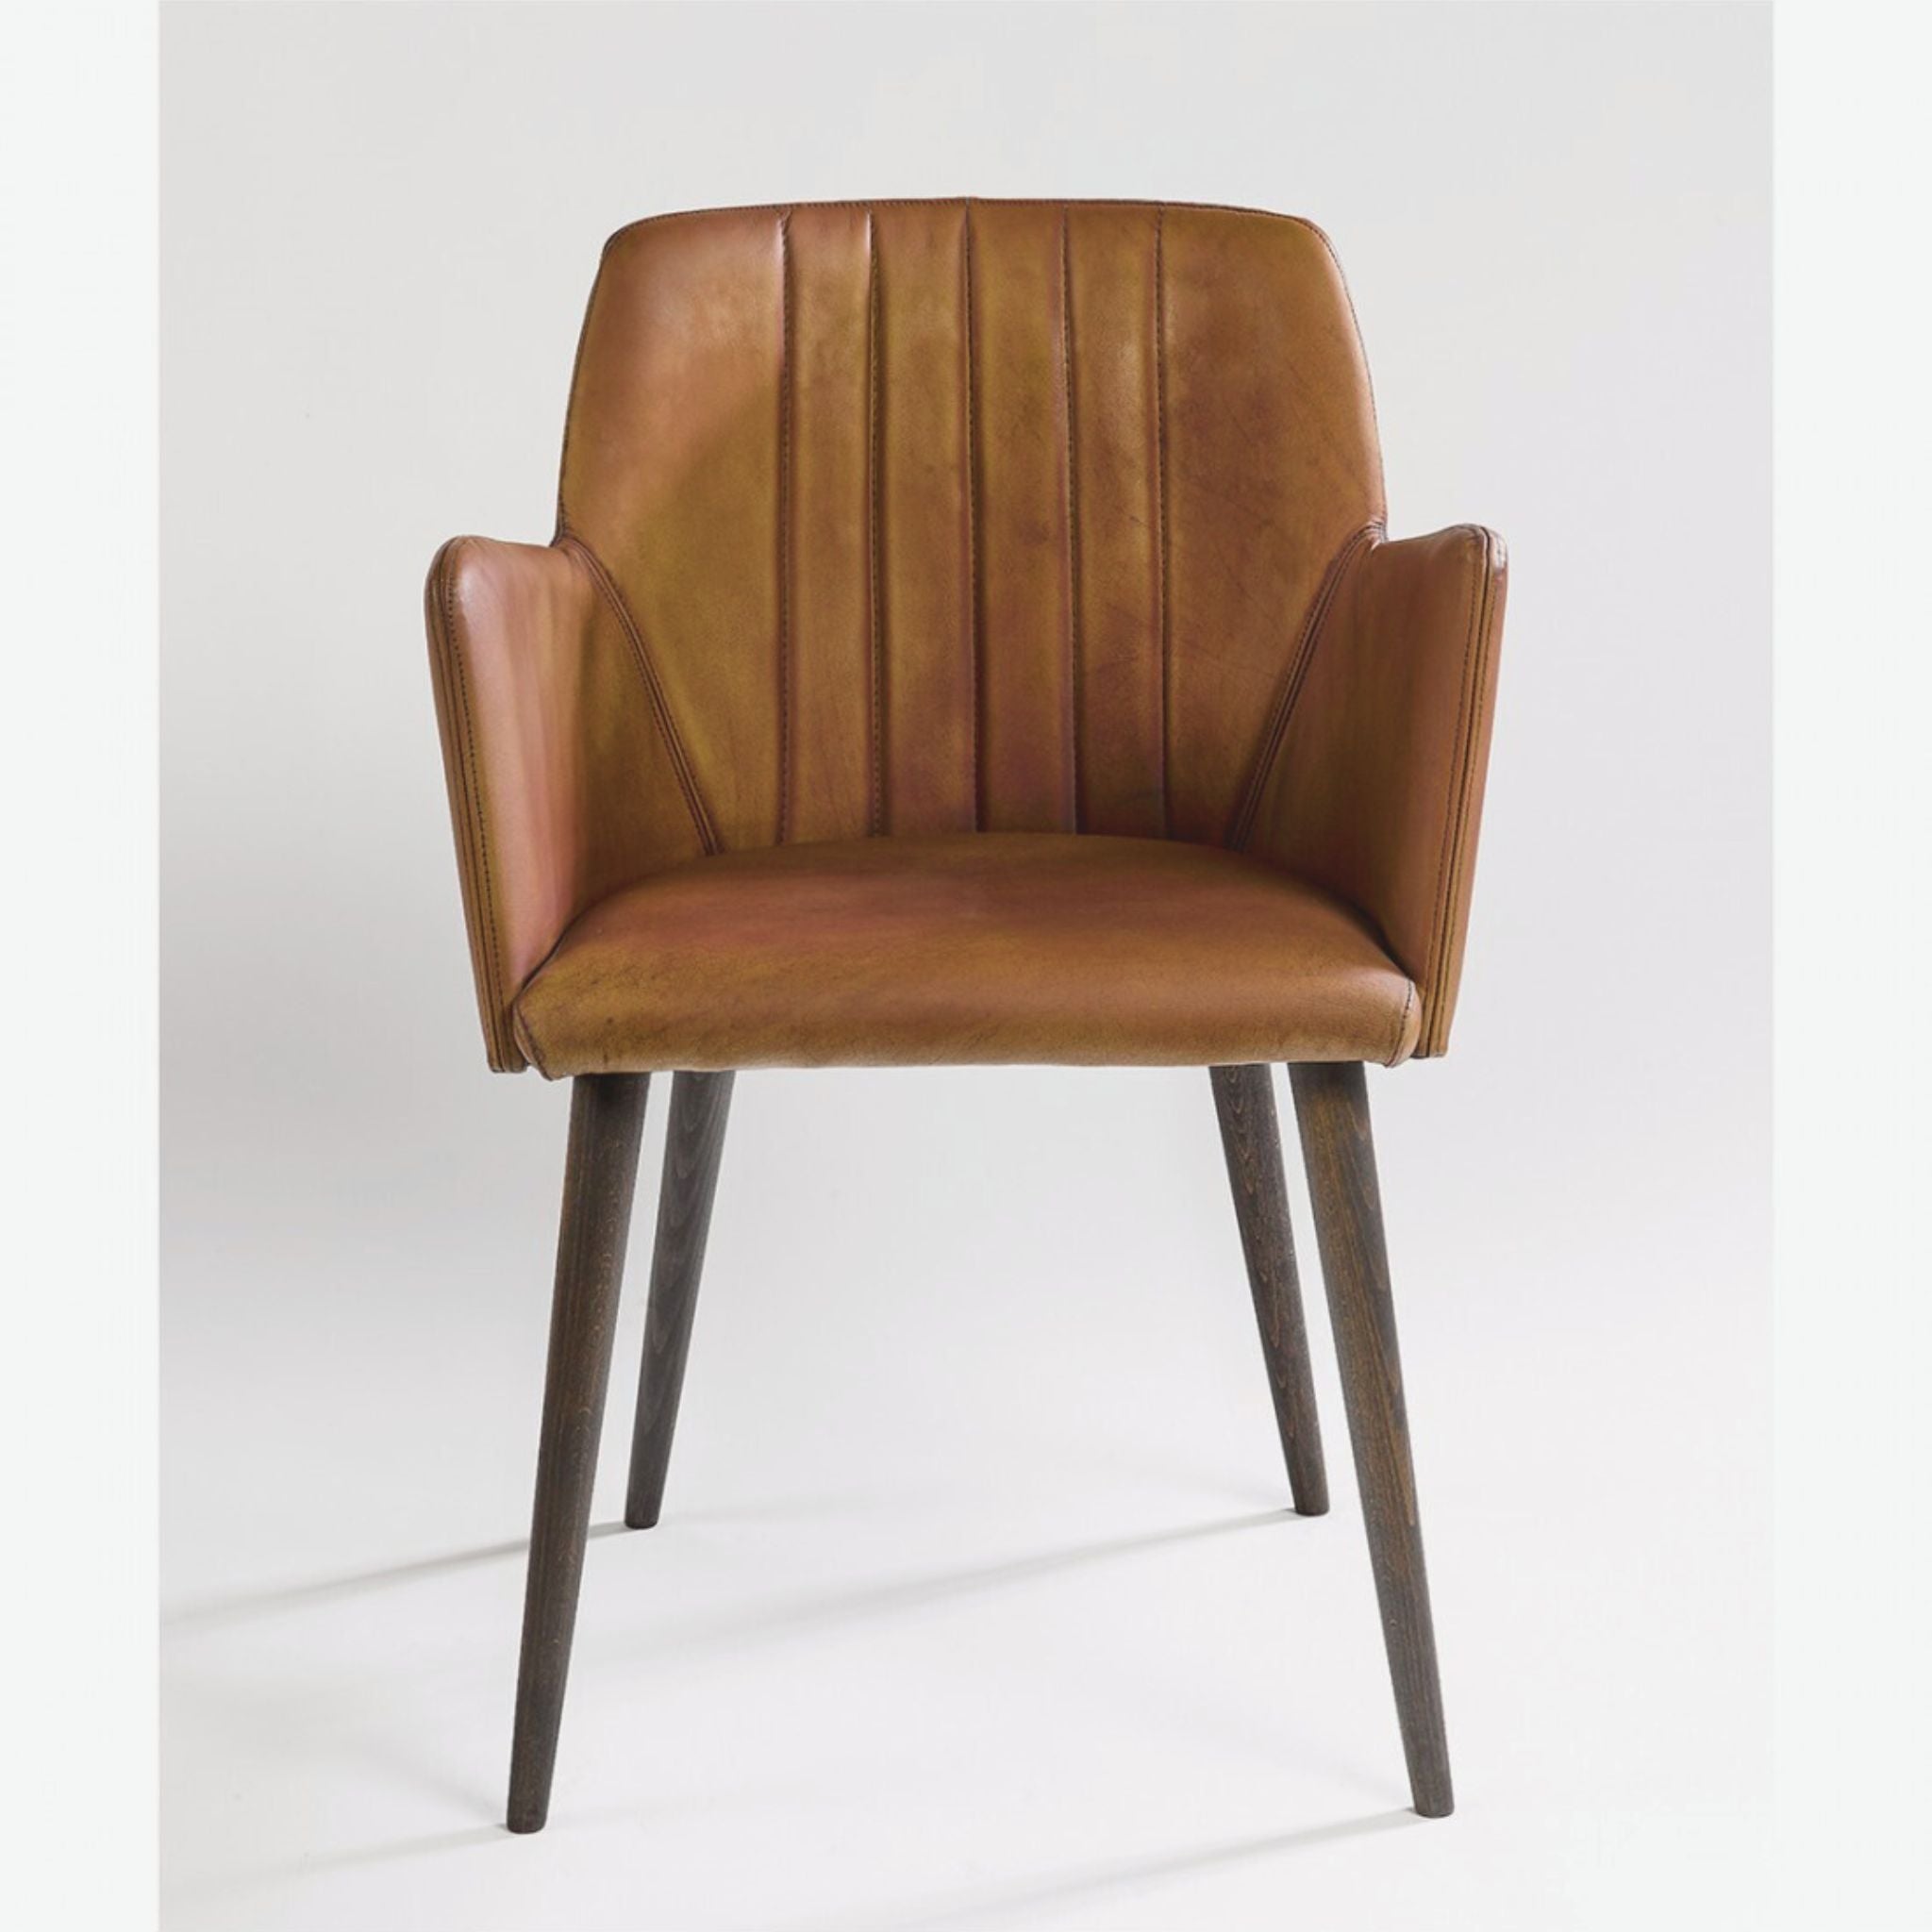 Crisal Decoracion Leather Dining Chair with Wooden Legs - ModernistaLiving